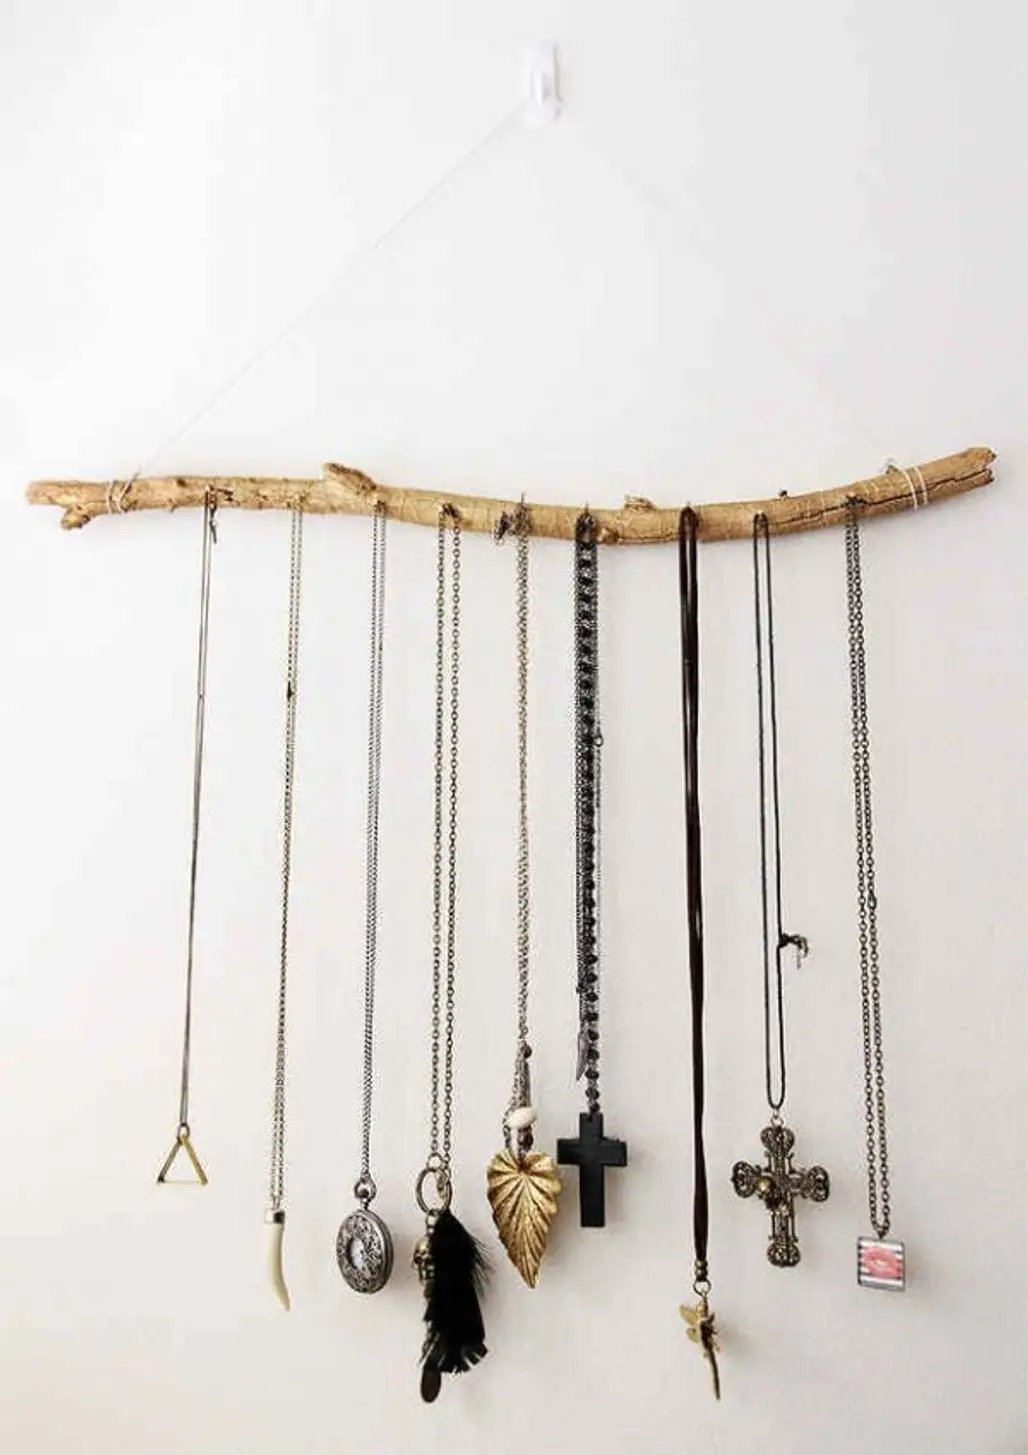 Use a Branch as a Jewelry Holder